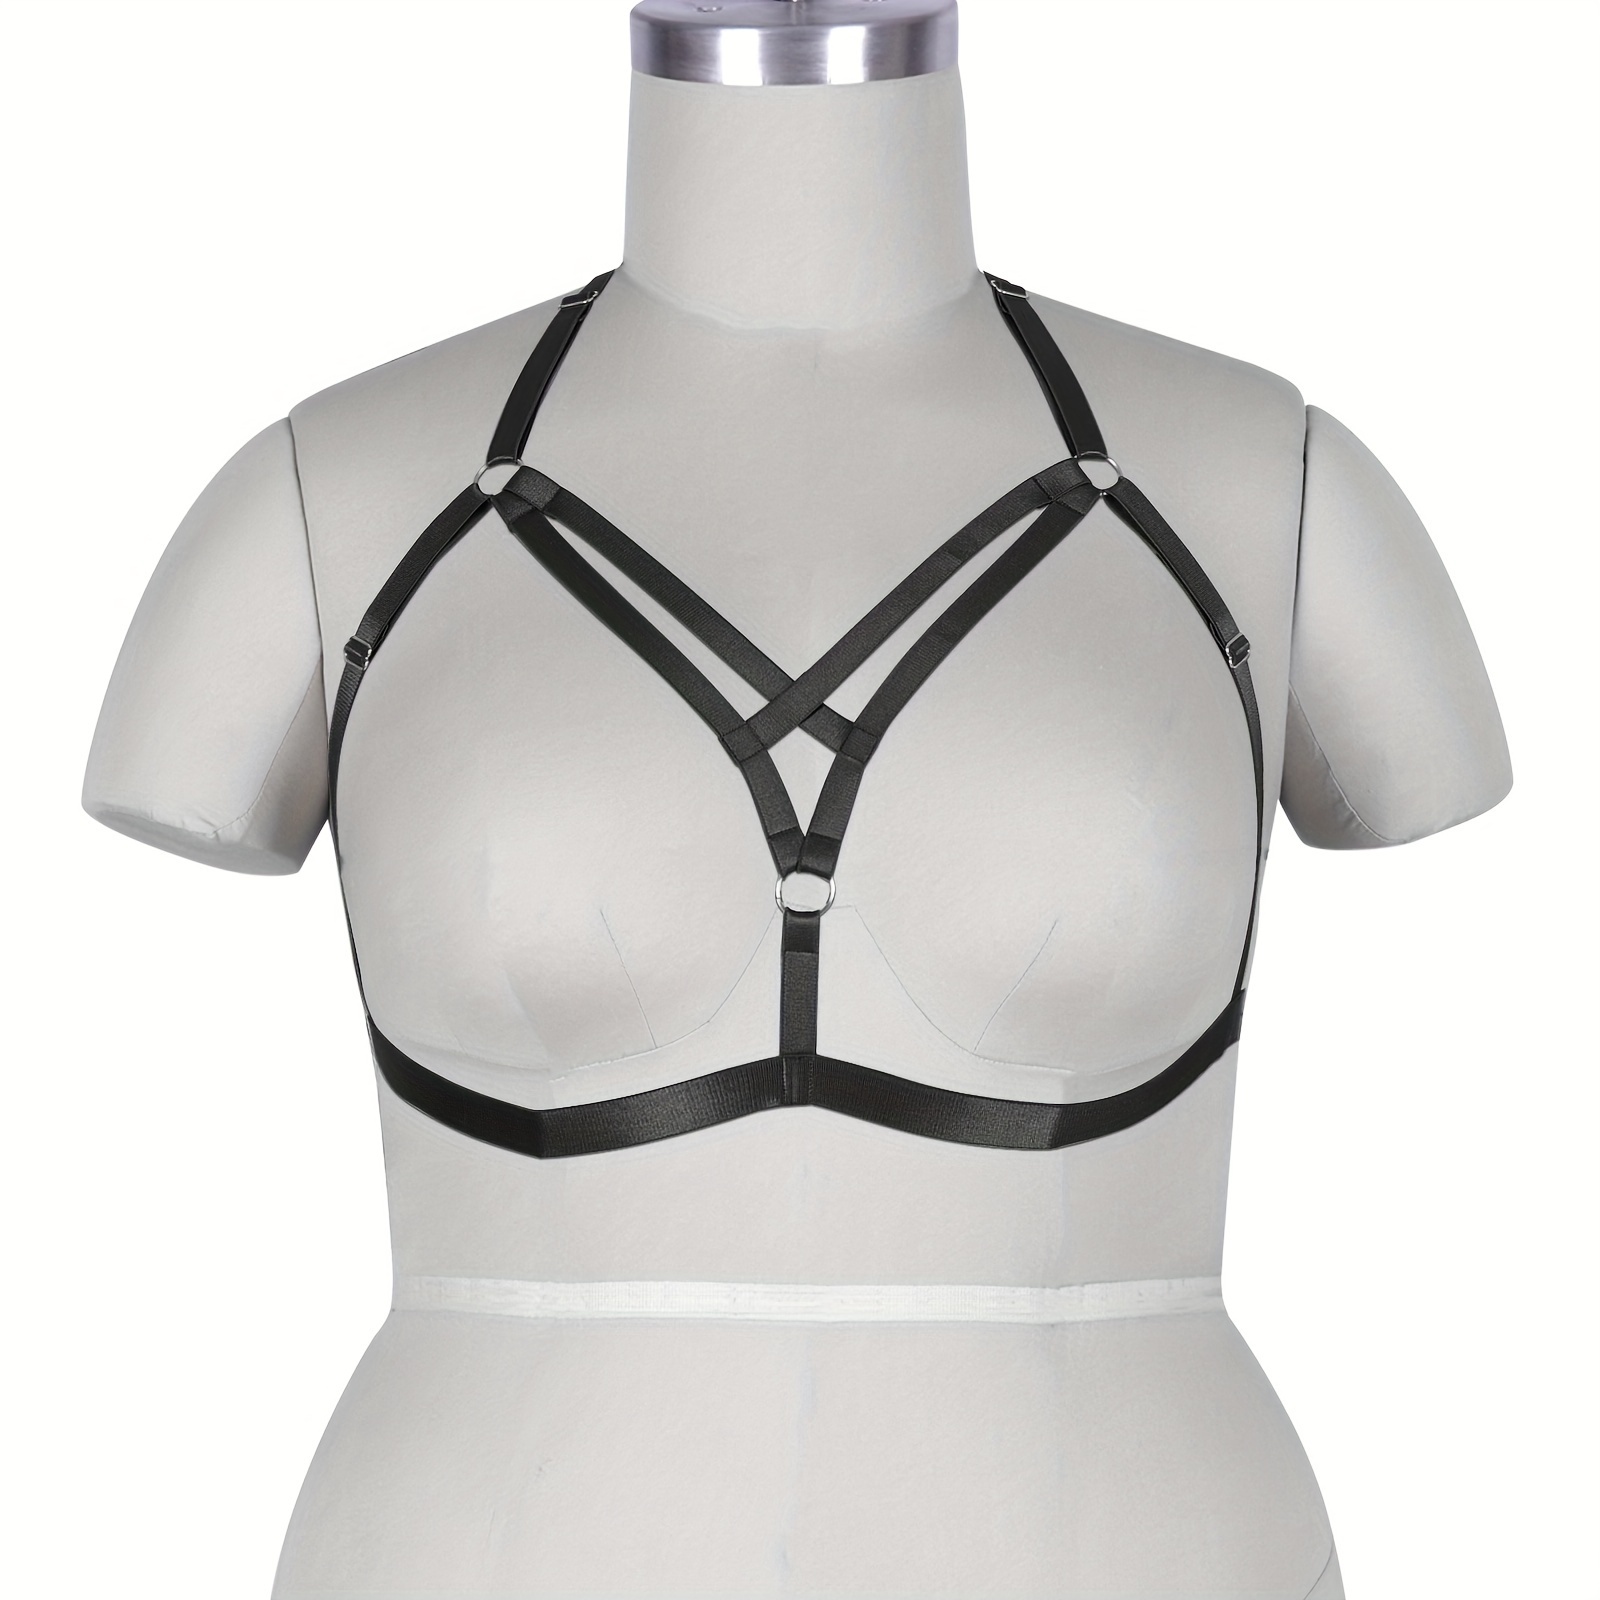 Gothic Women's Hollow out Elastic Cage Bra Harness 